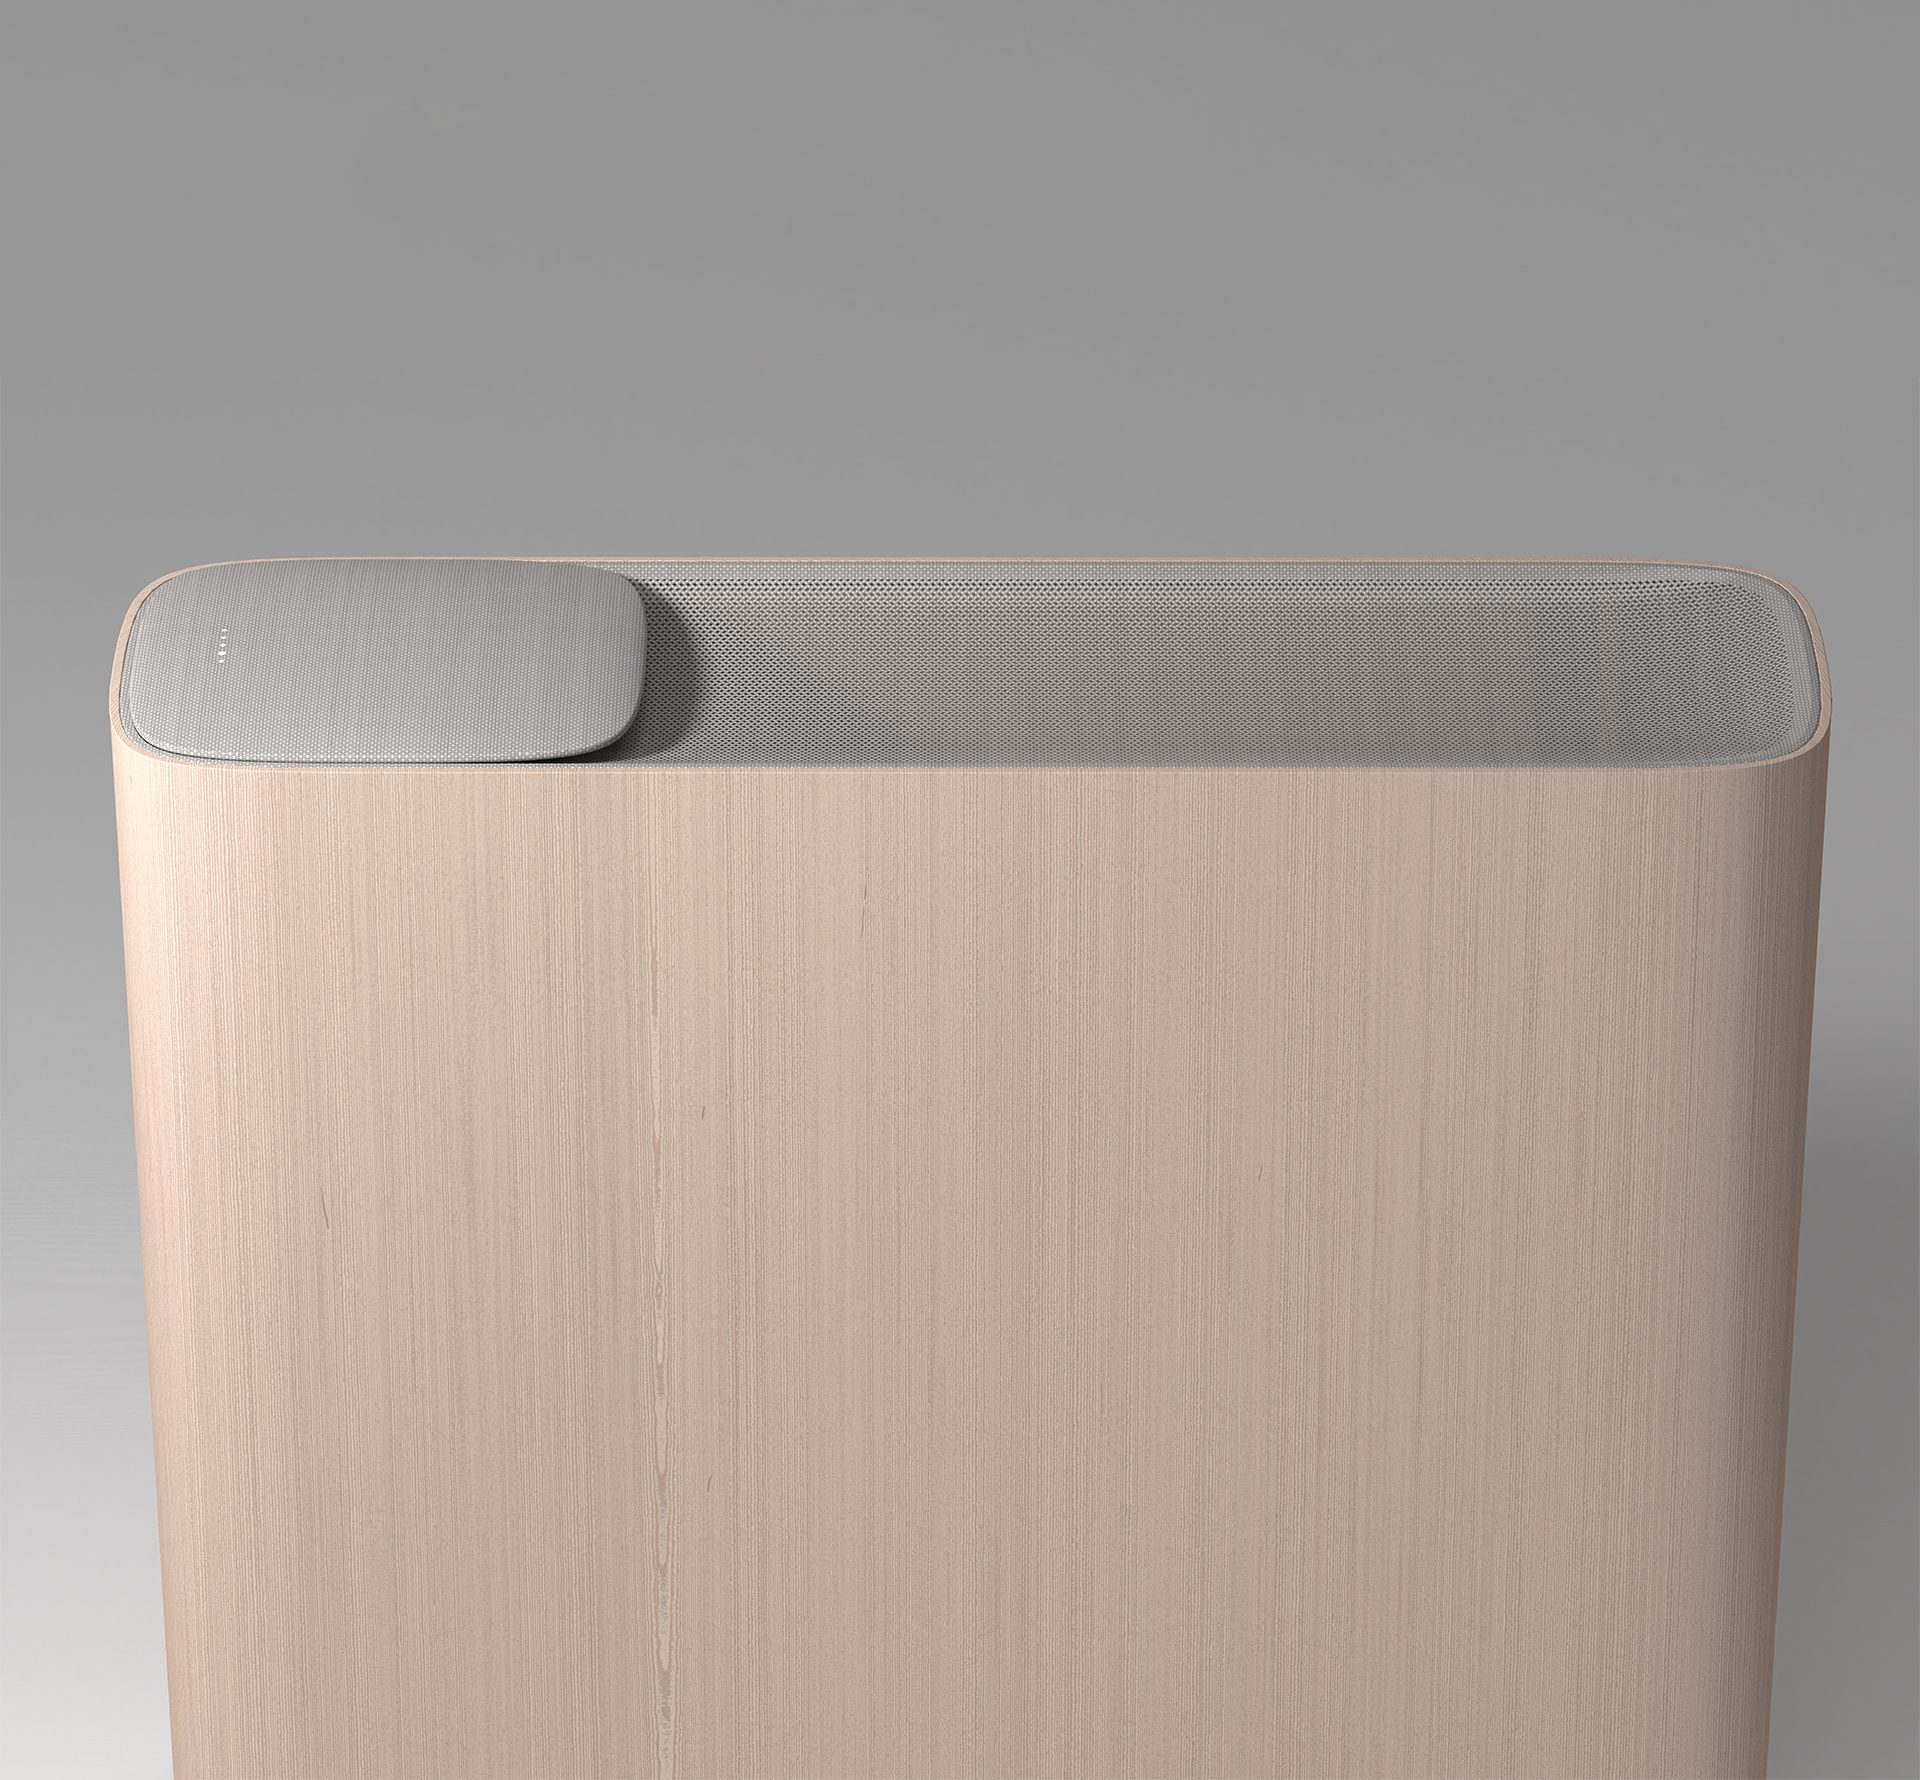 Side view of aalto a design concept by Rodd. the image shows a beech timber clad air purifier in side elevation, with pale grey fabric upper set in a pale grey scene.